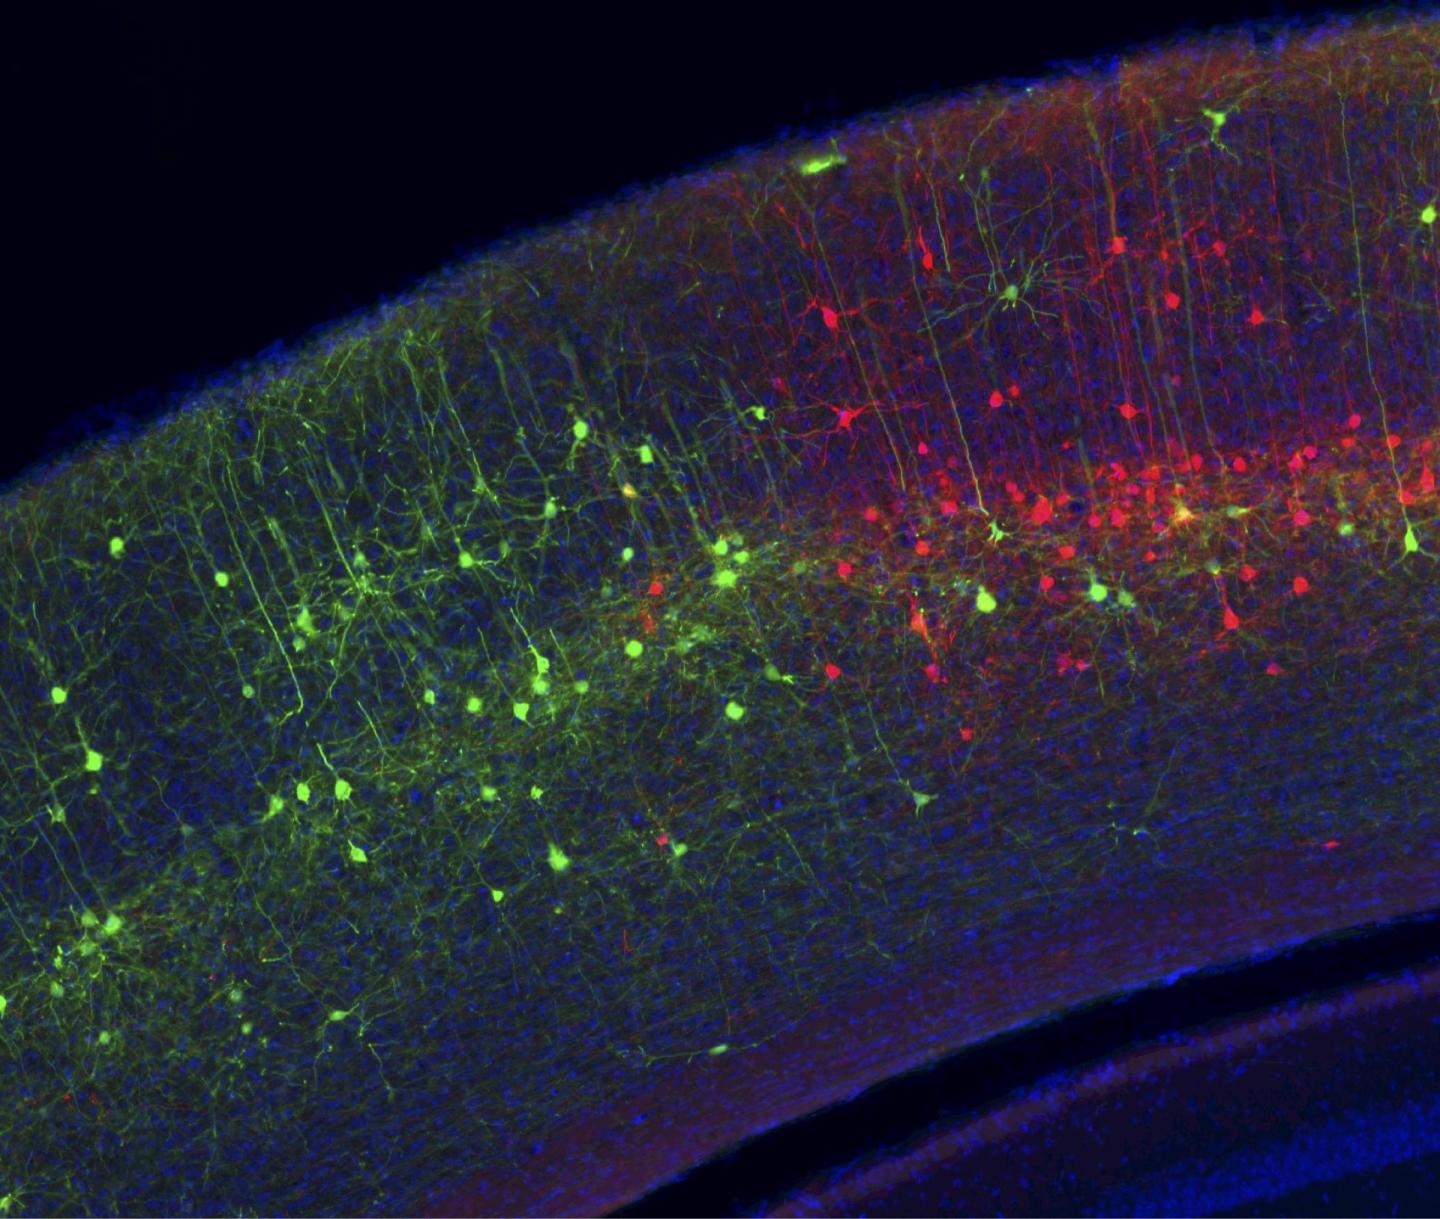 Nerve Cells in Mouse Brain